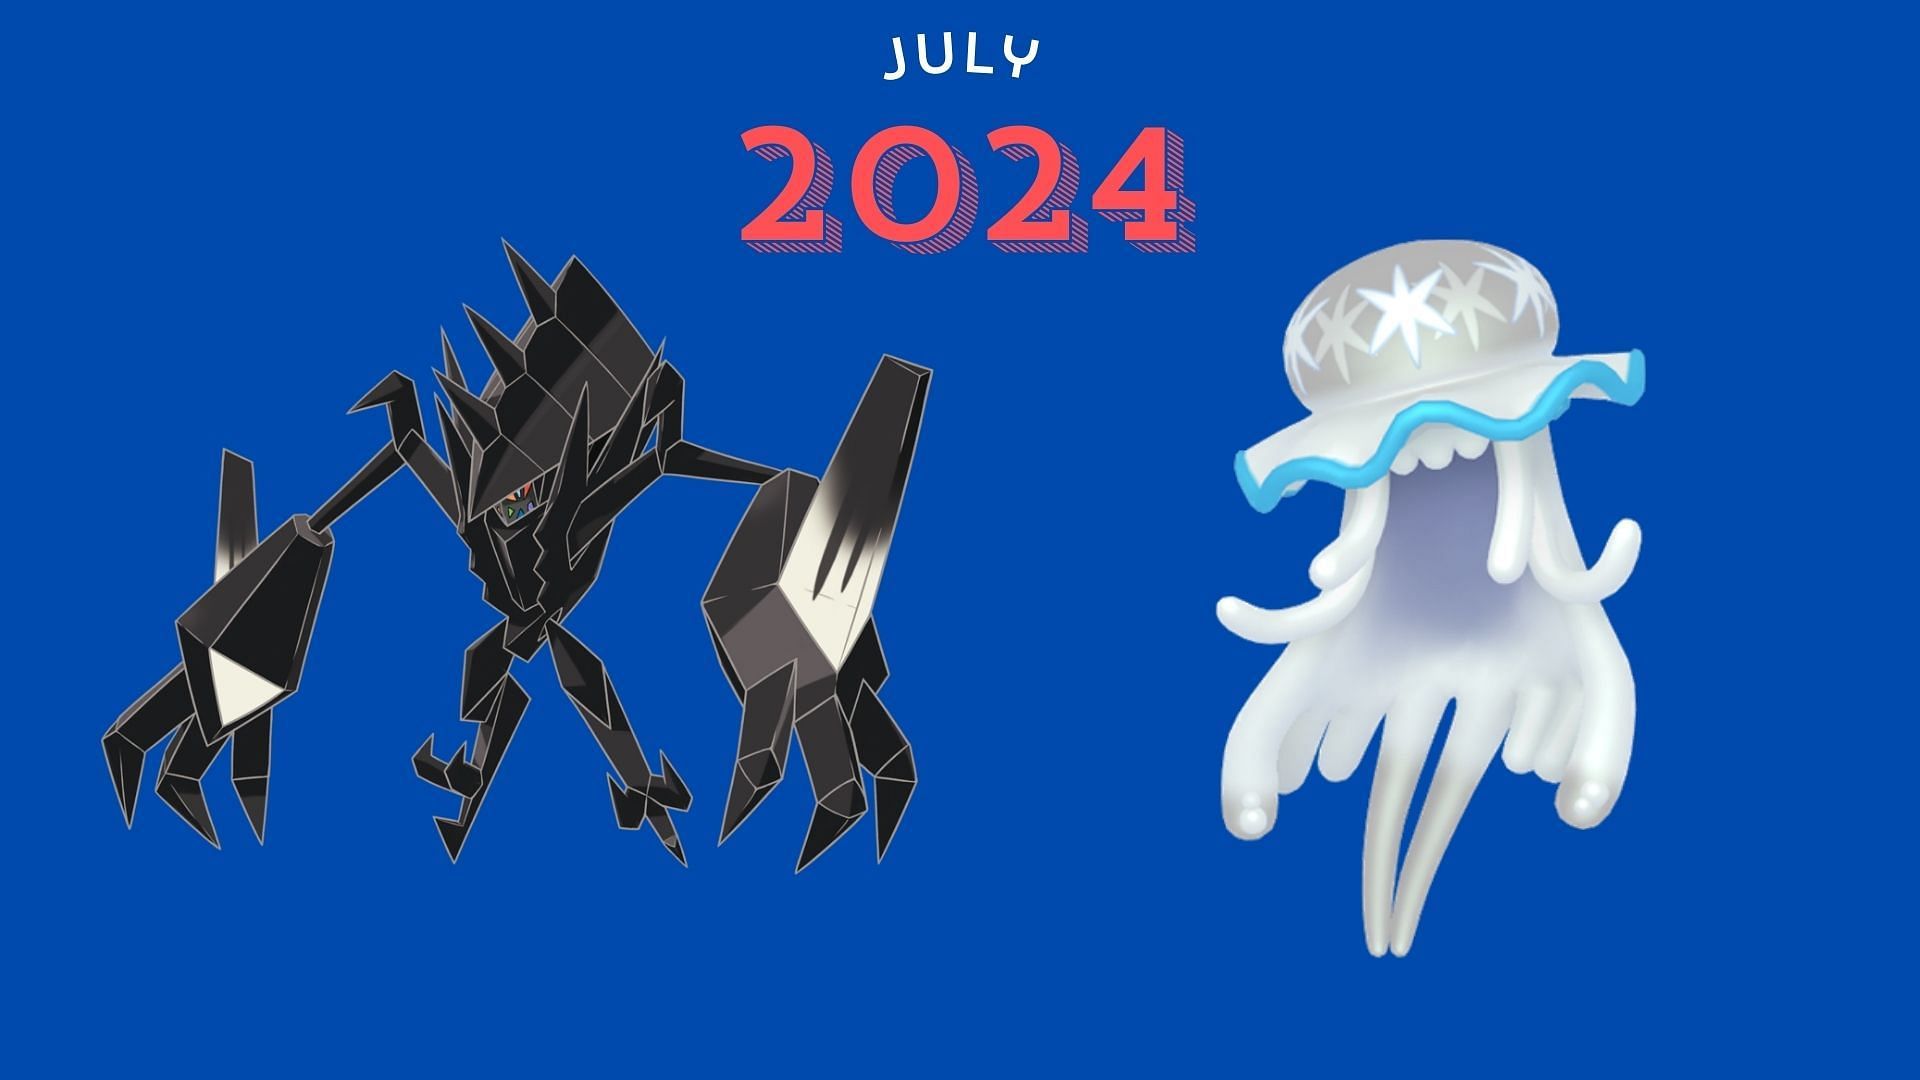 5 contents to be excited about in Pokemon GO in July 2024